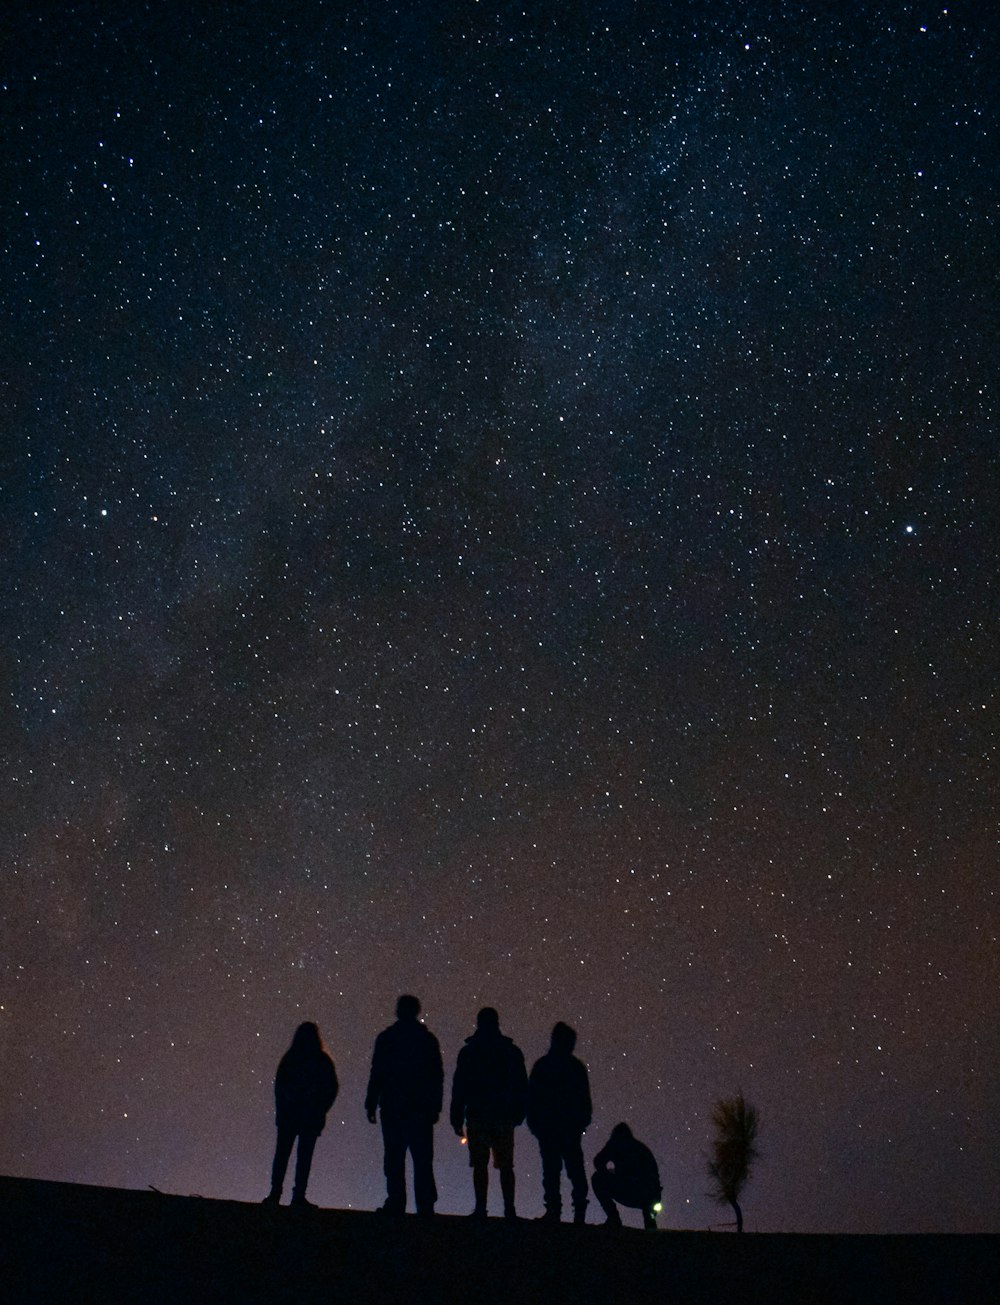 silhouette of five persons staring at the stars at night